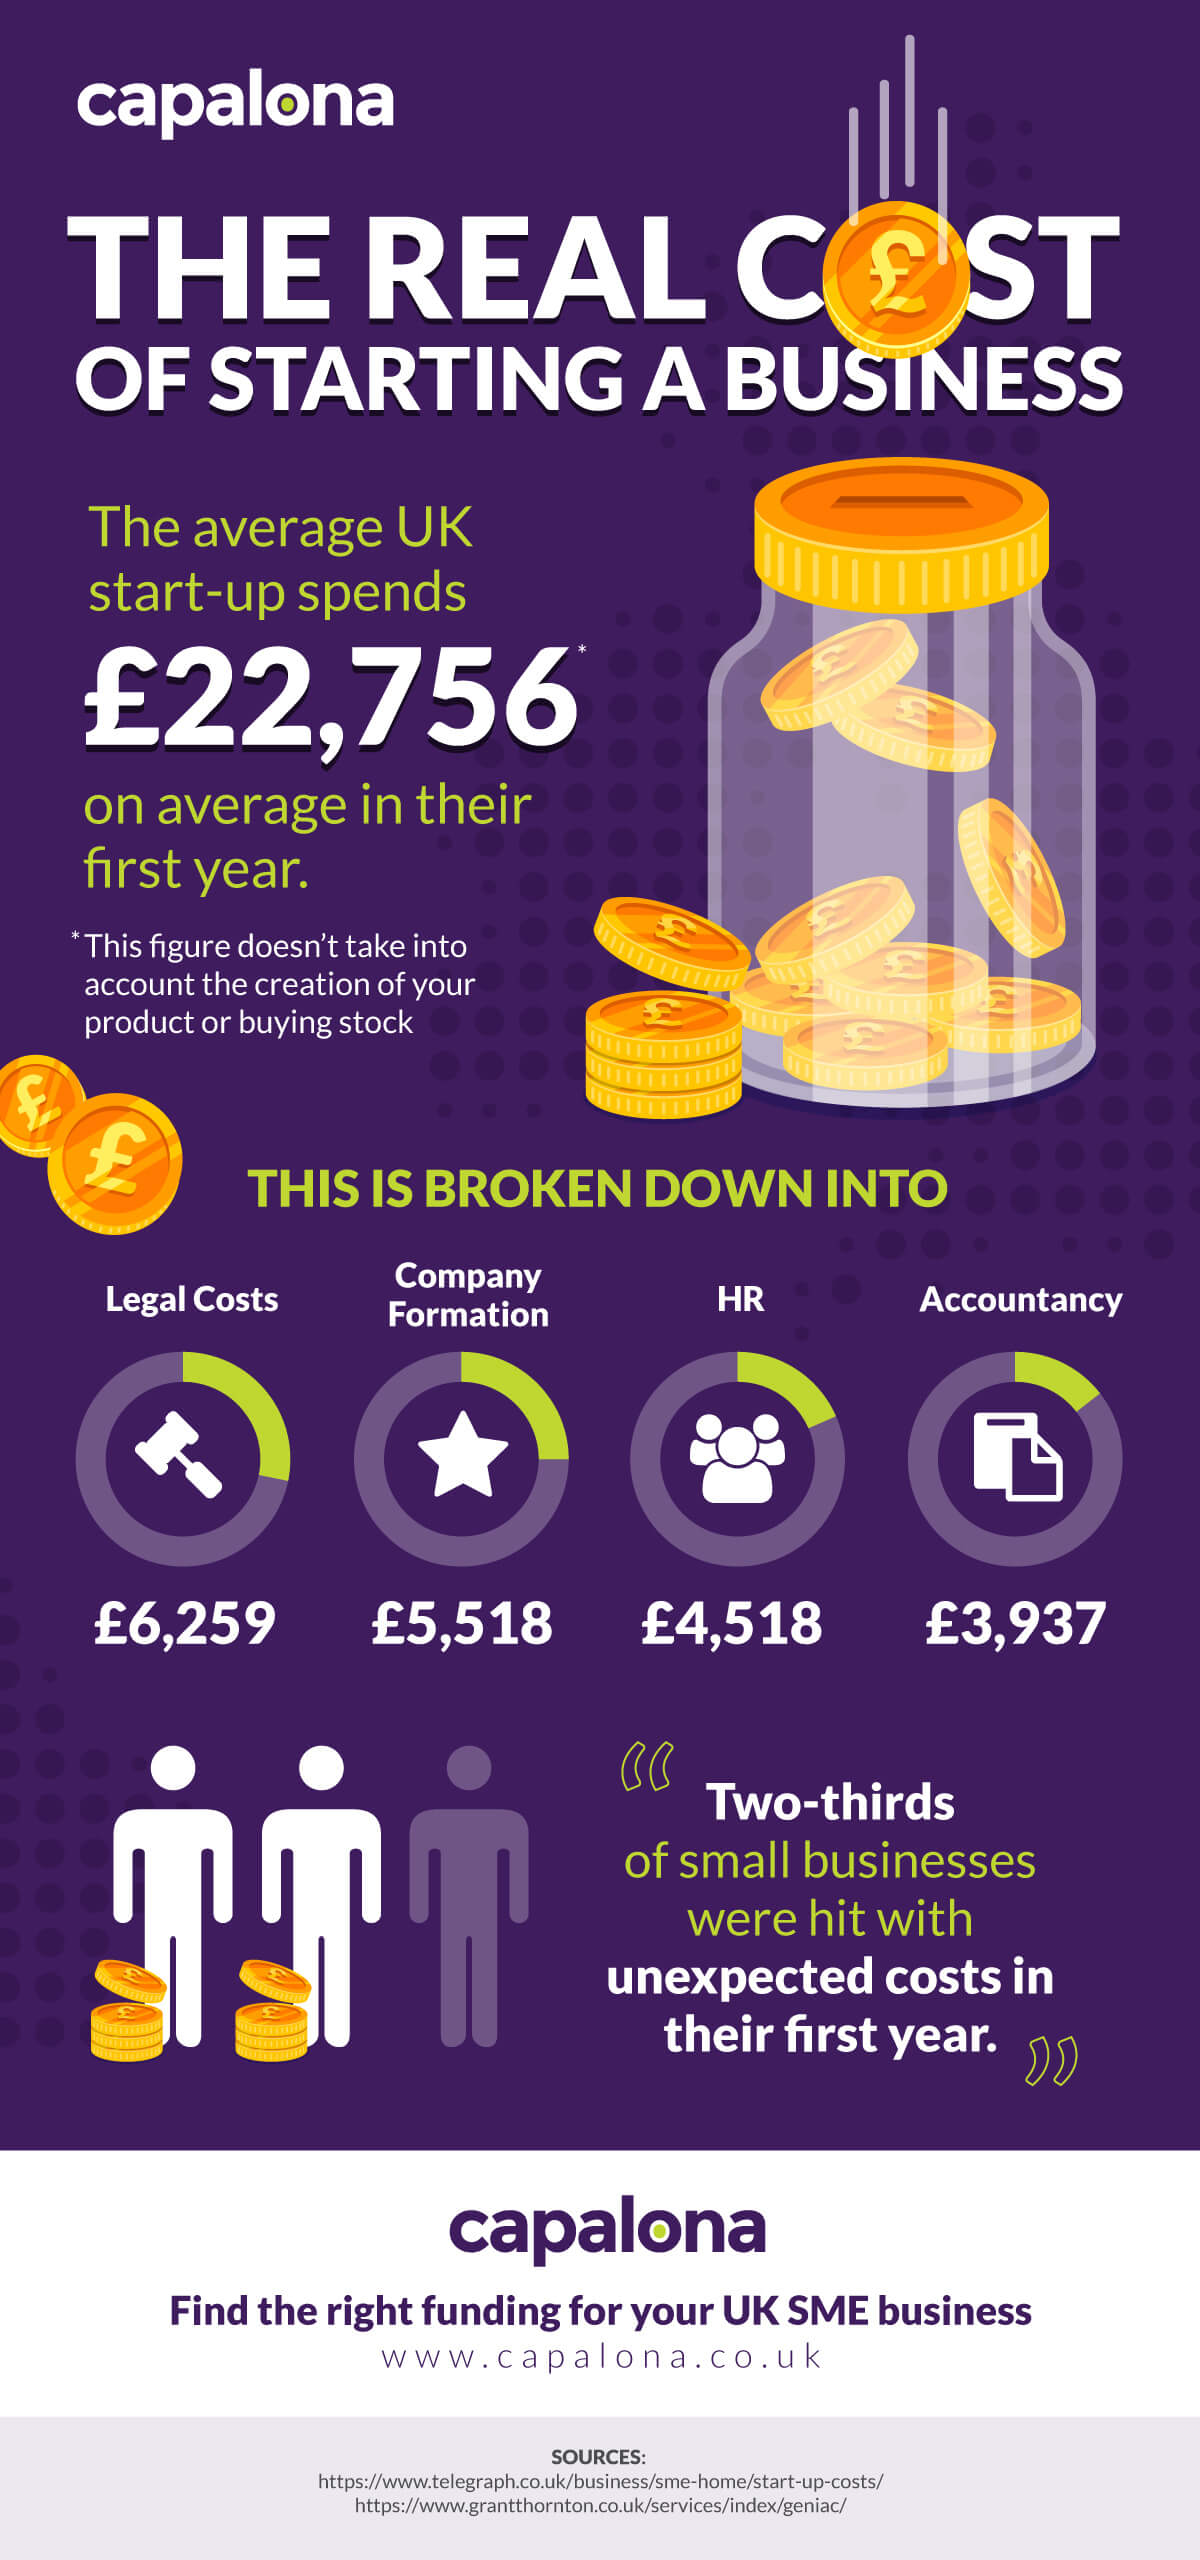 The real cost of starting a business infographic